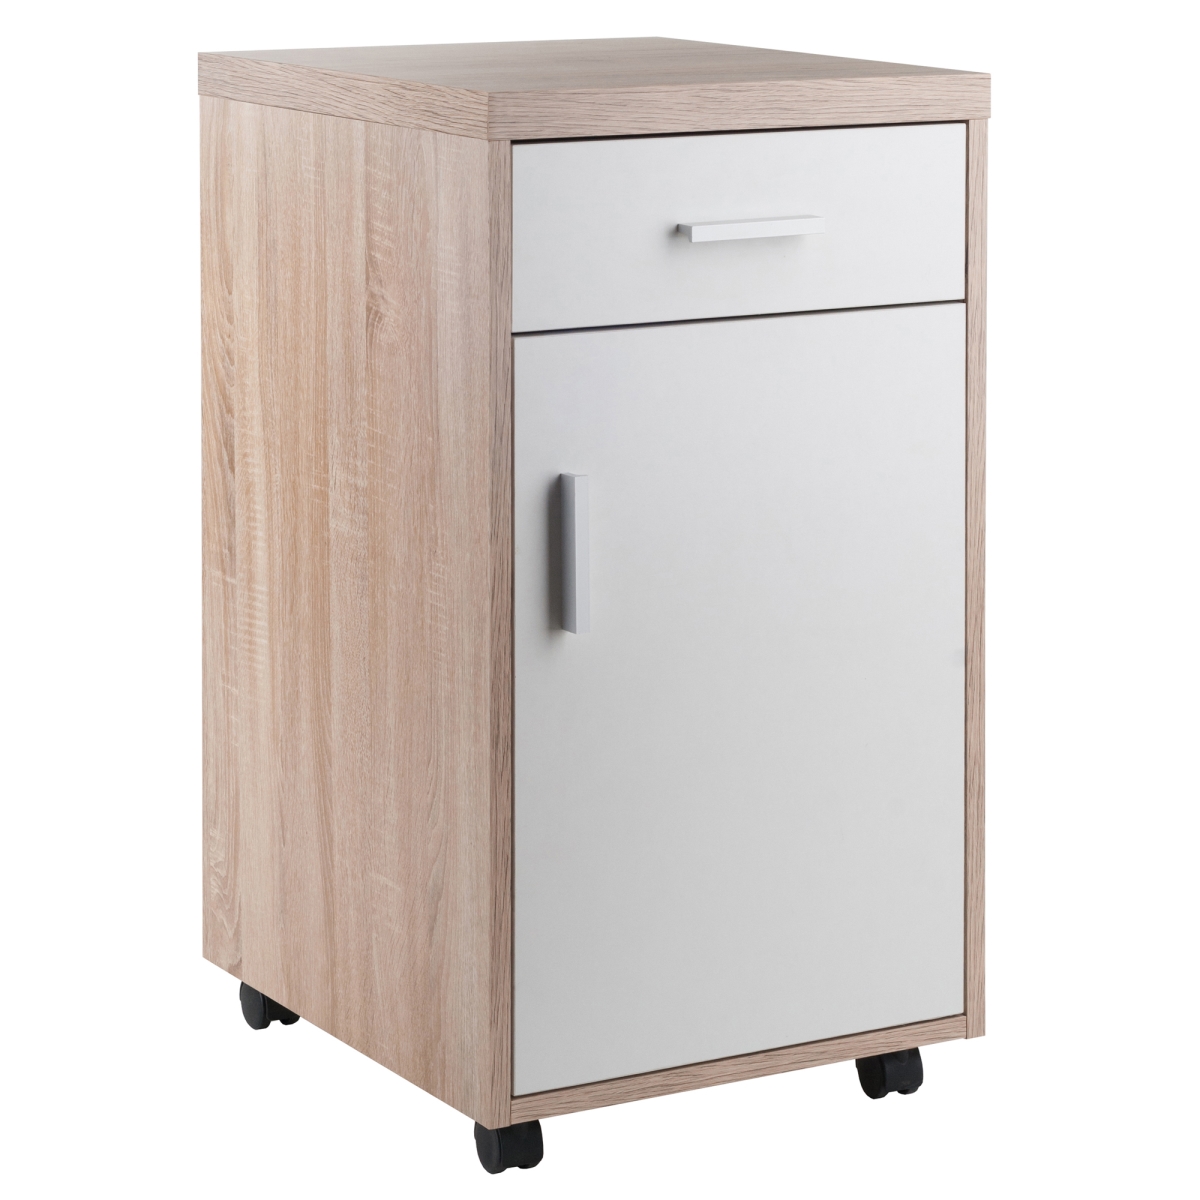 18220 Kenner Reclaimed Wood Mobile Storage Cabinet With 1 Drawer - White - 15.75 X 18.3 X 29.25 In.